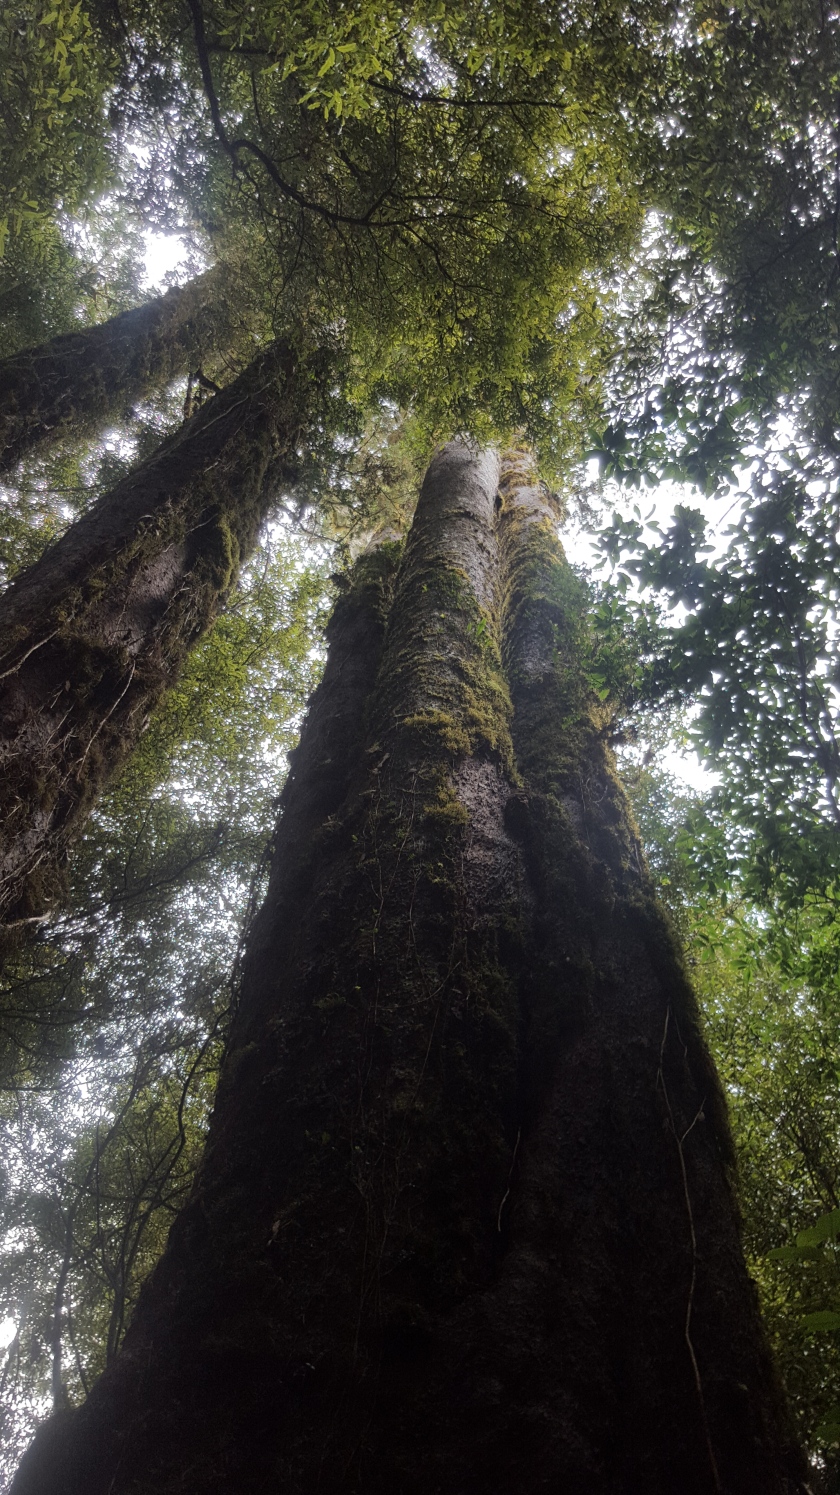 Looking up to the sky from the base of a large kauri tree which splits into 3 separate trees.